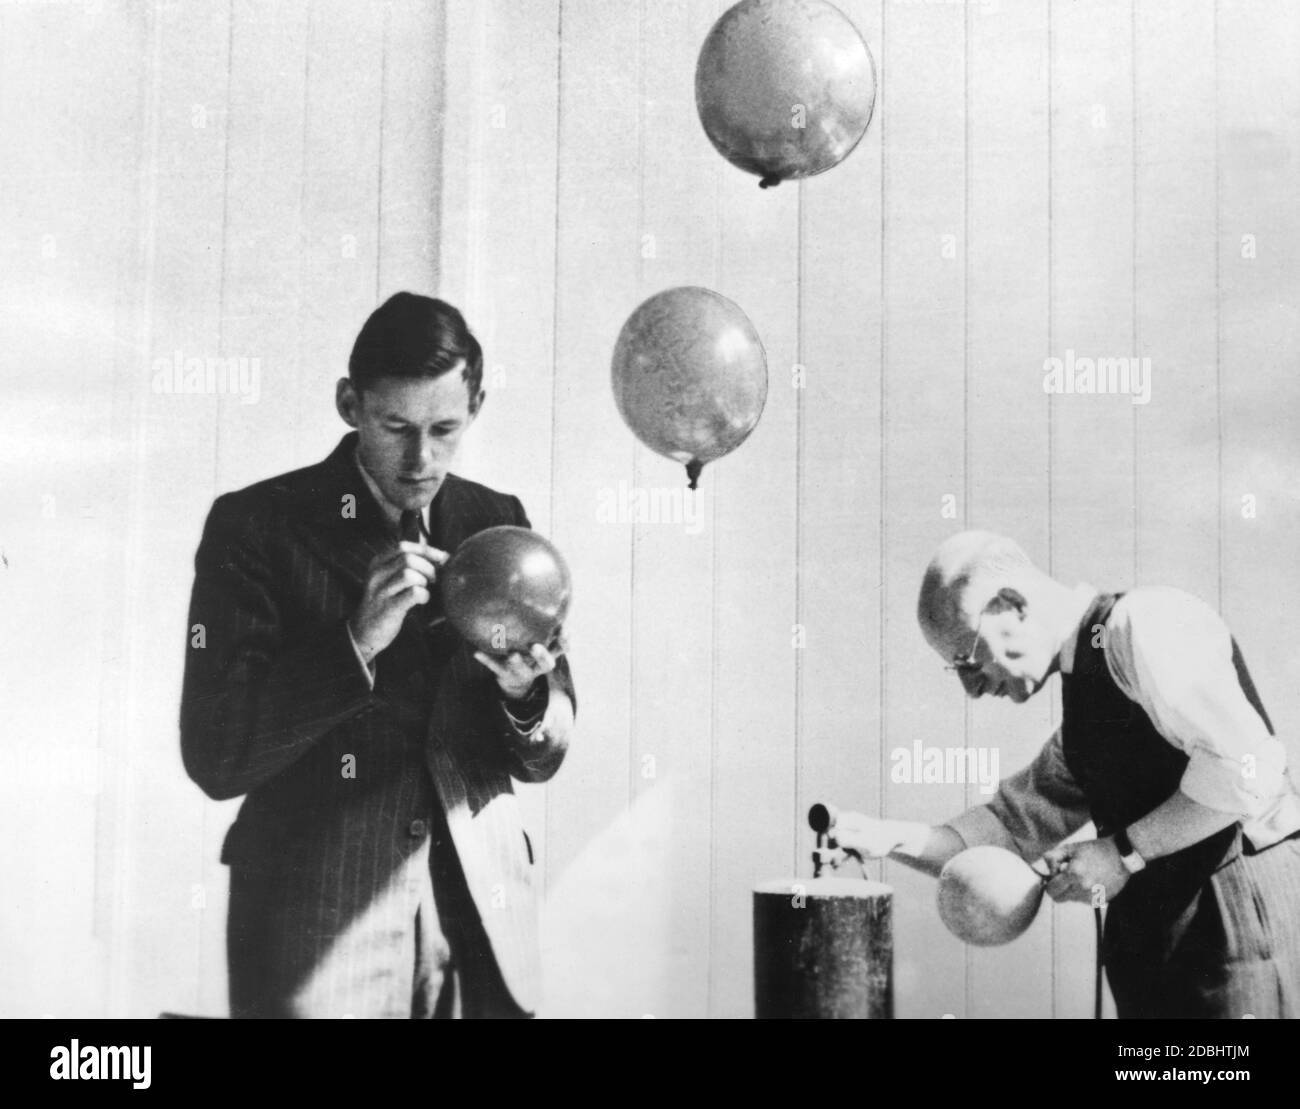 English researchers use balloons to test air currents. Stock Photo